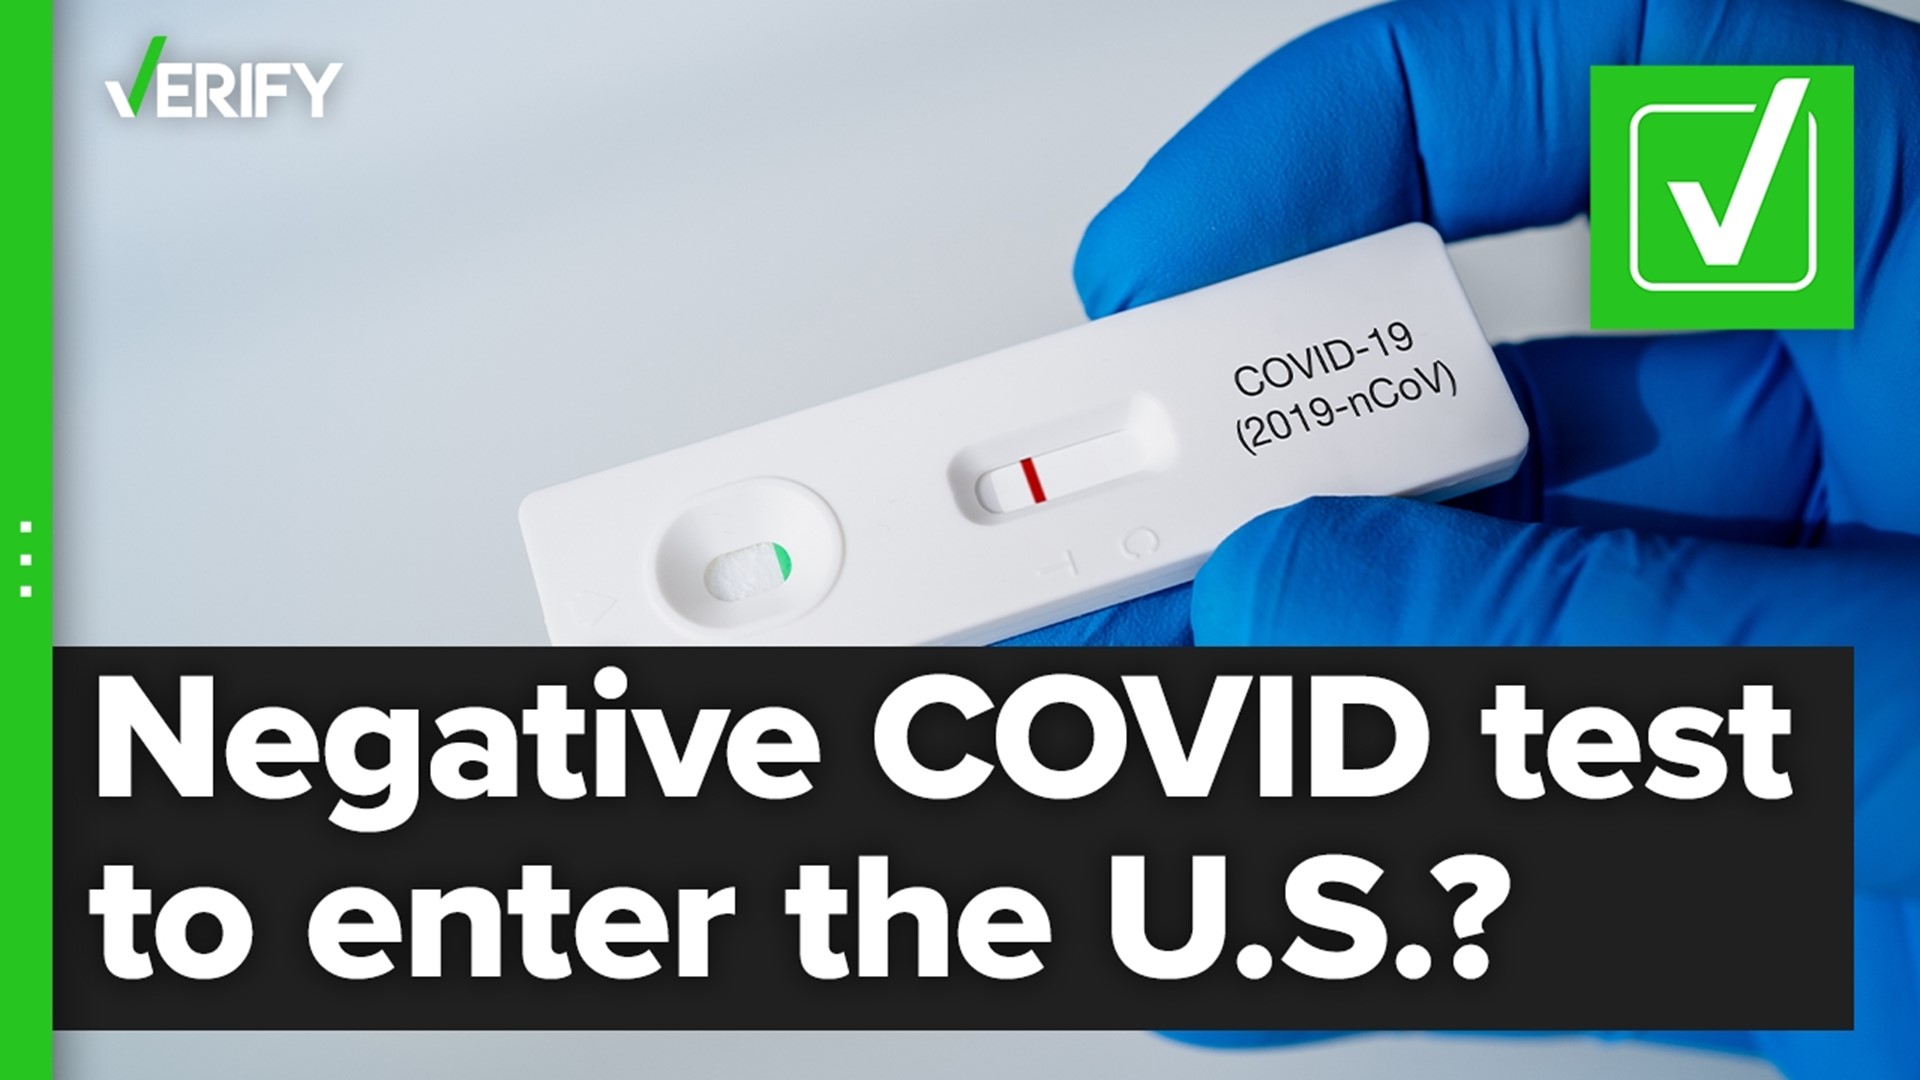 Do you still need a negative COVID-19 test before flying into the U.S.? The VERIFY team confirms this is true.